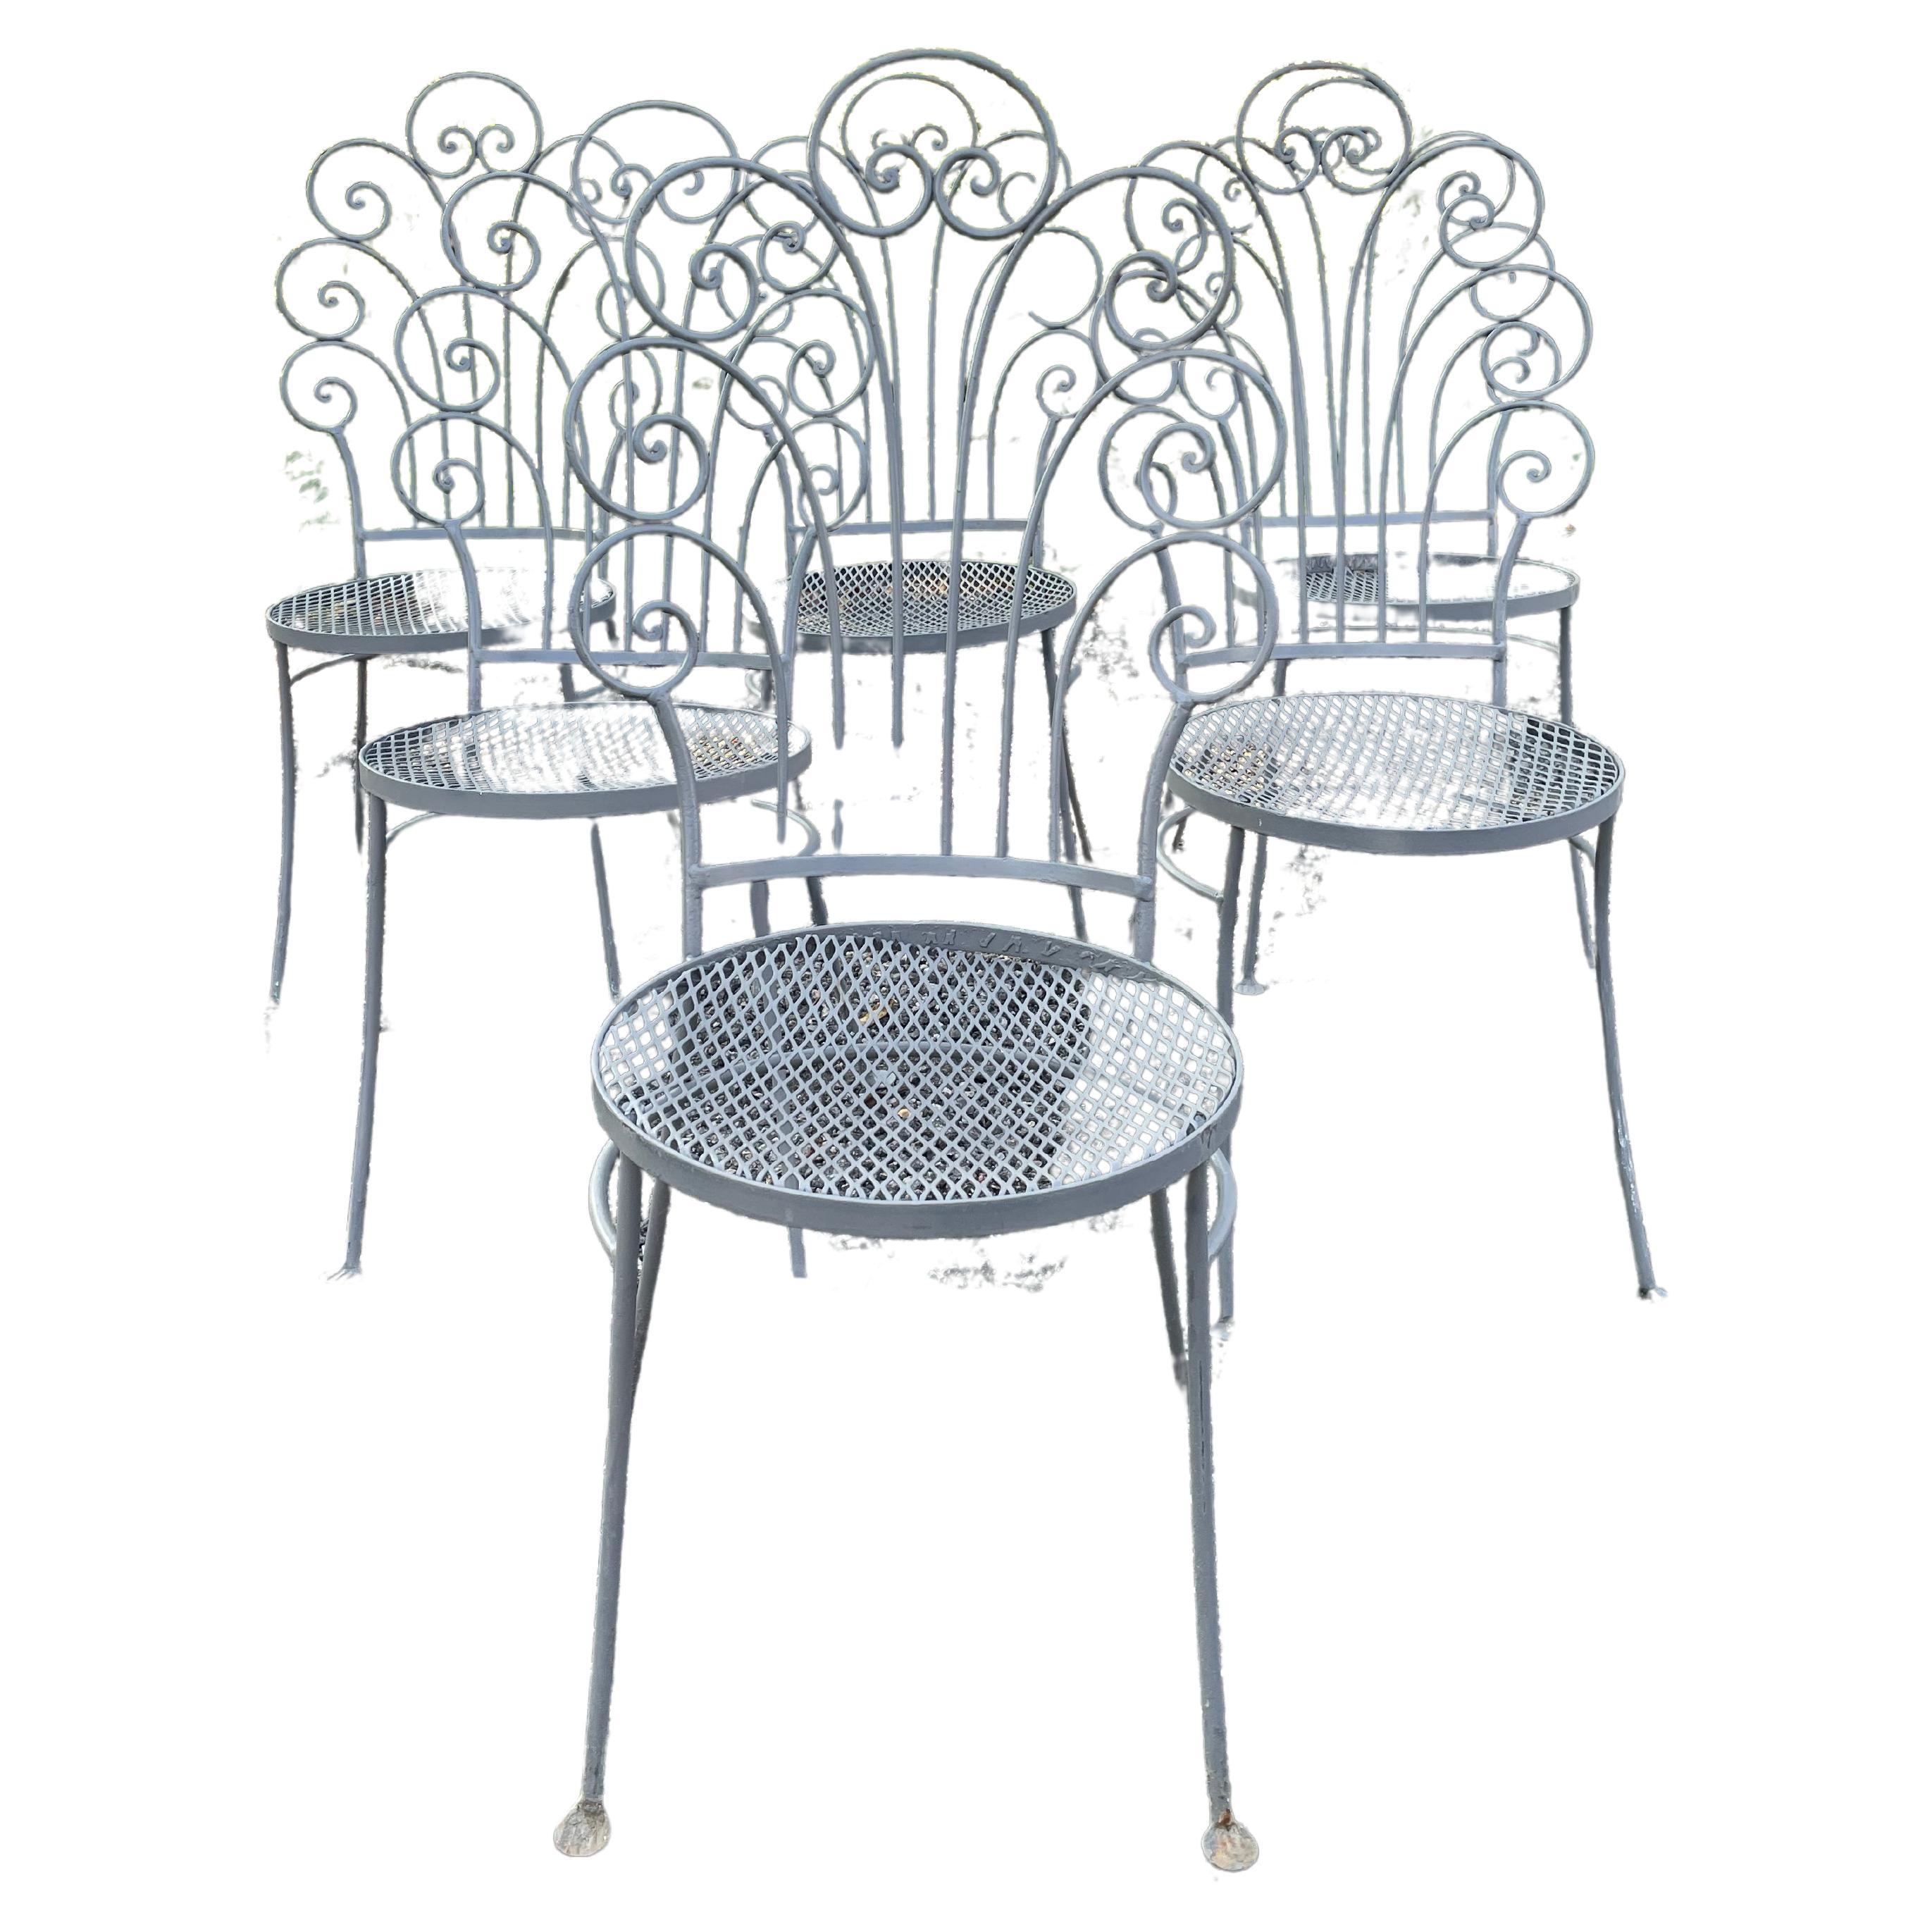 Vintage Wrought Iron Outdoor Patio Furniture For Sale